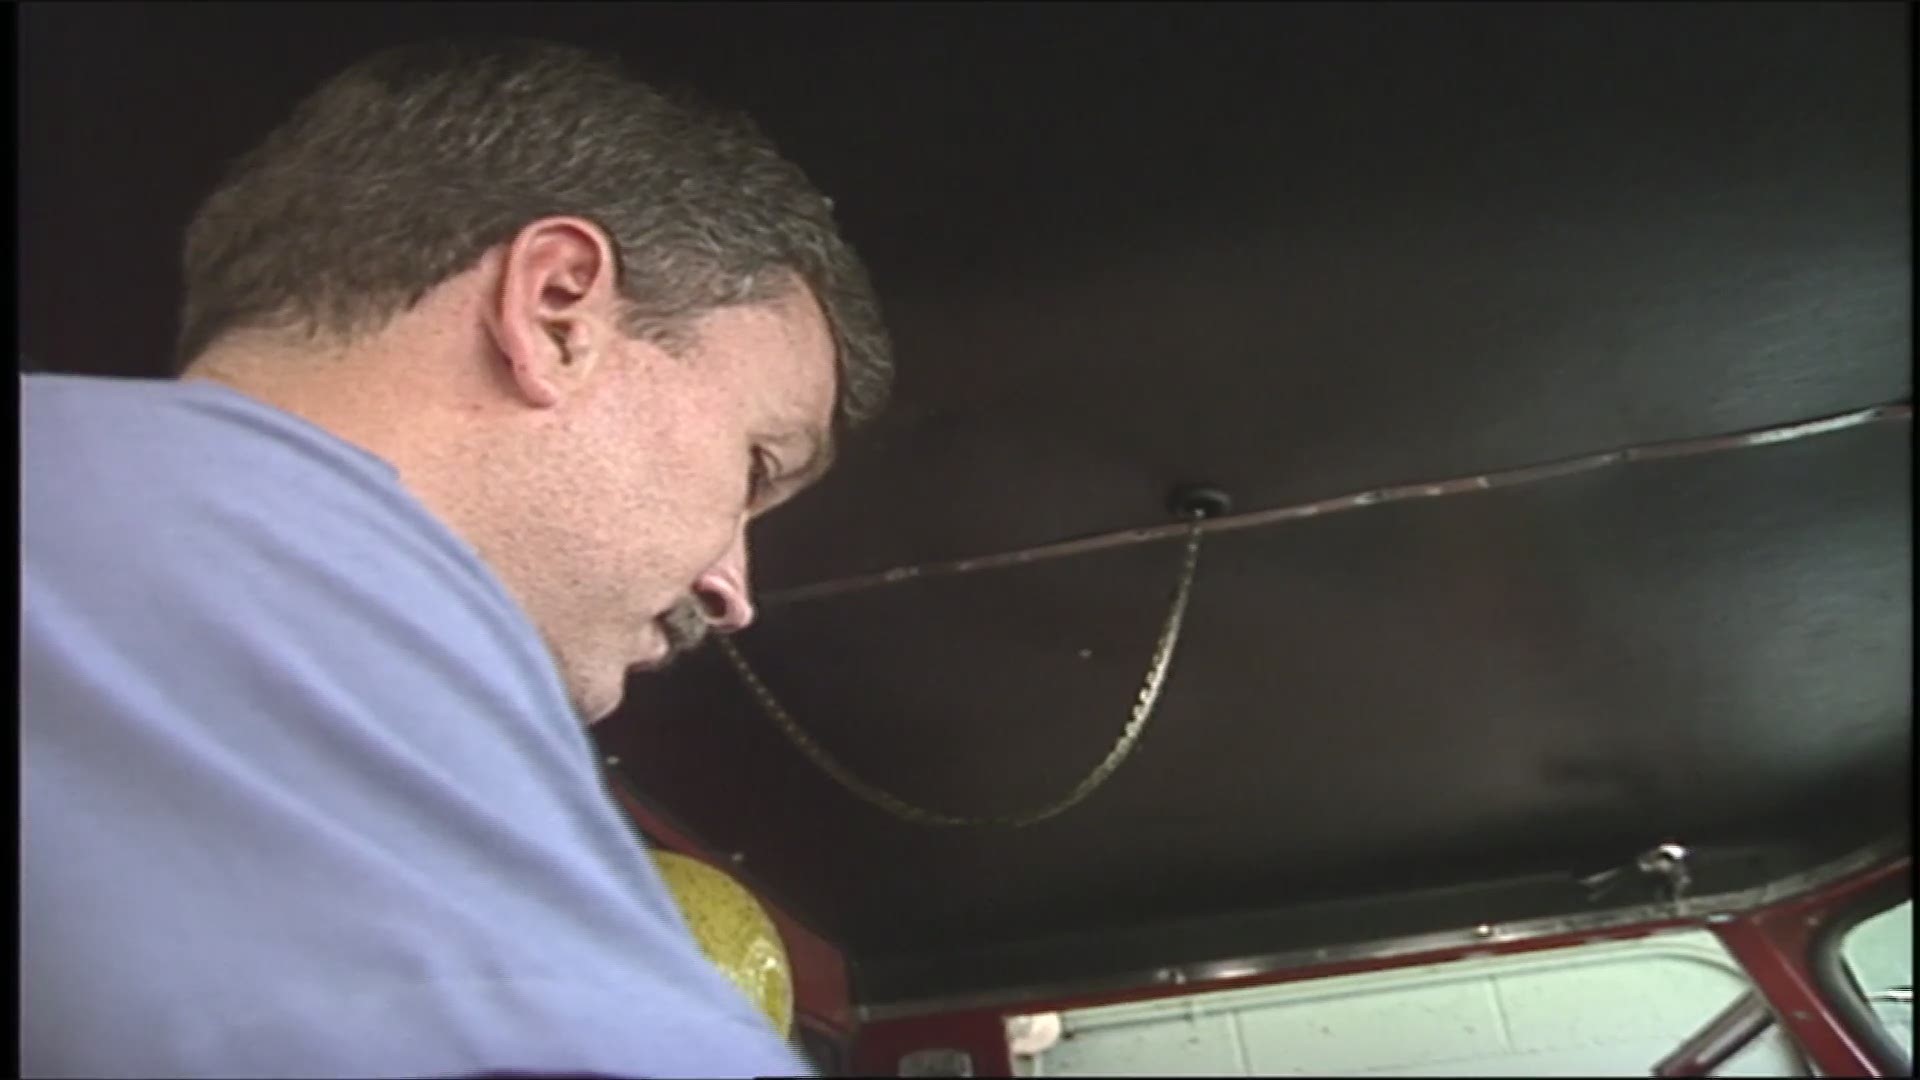 Nearly one year after four girls were killed in an Austin yogurt shop, KVUE spoke to one of the Austin Fire Department firefighters who responded to that scene. (This piece originally aired on November 24, 1992.) 2019 STORY: http://bit.ly/2VFwynH